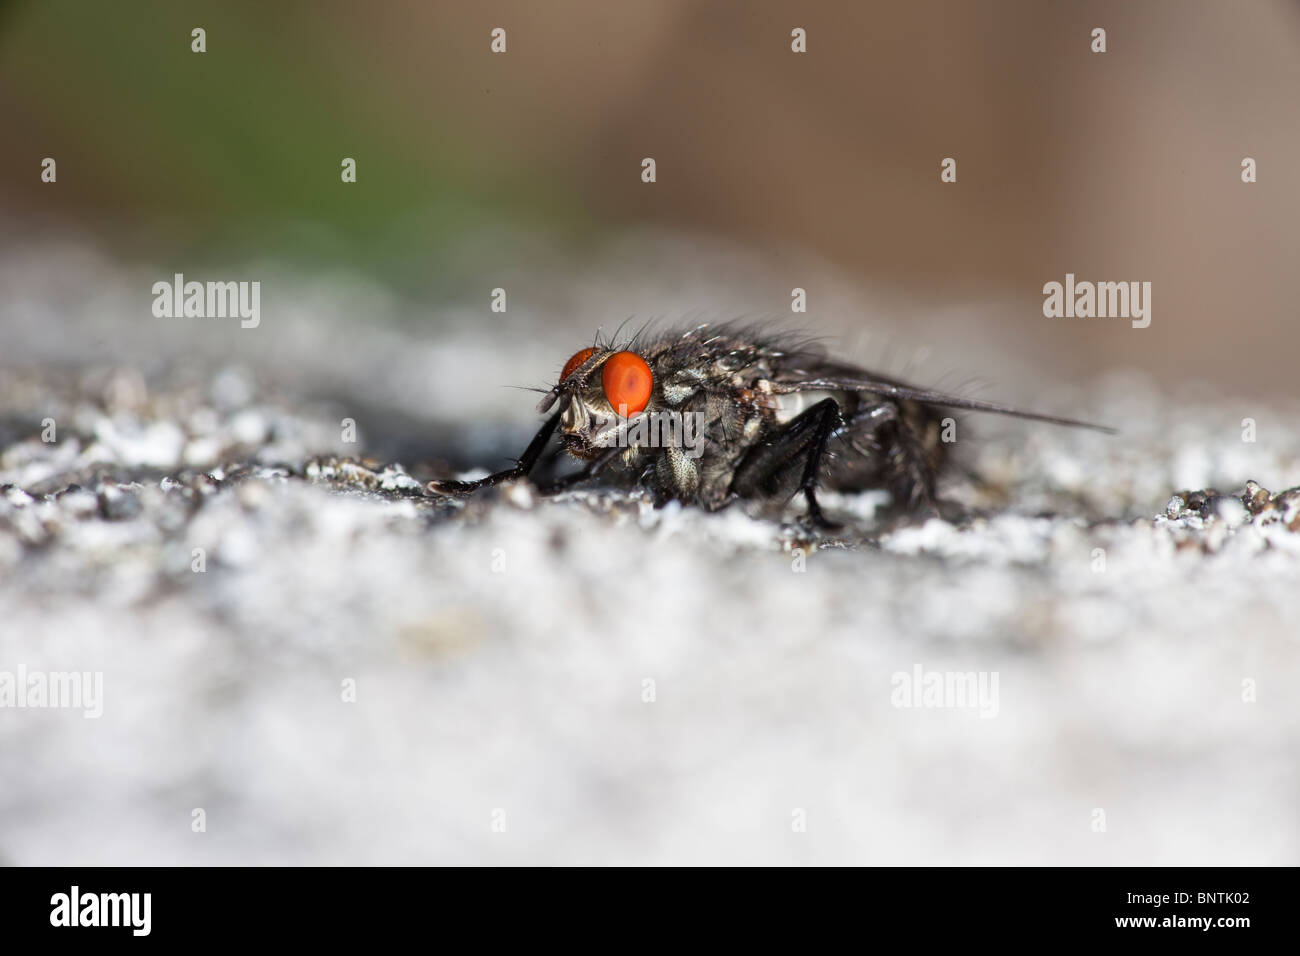 Cloce up of a blowfly Stock Photo